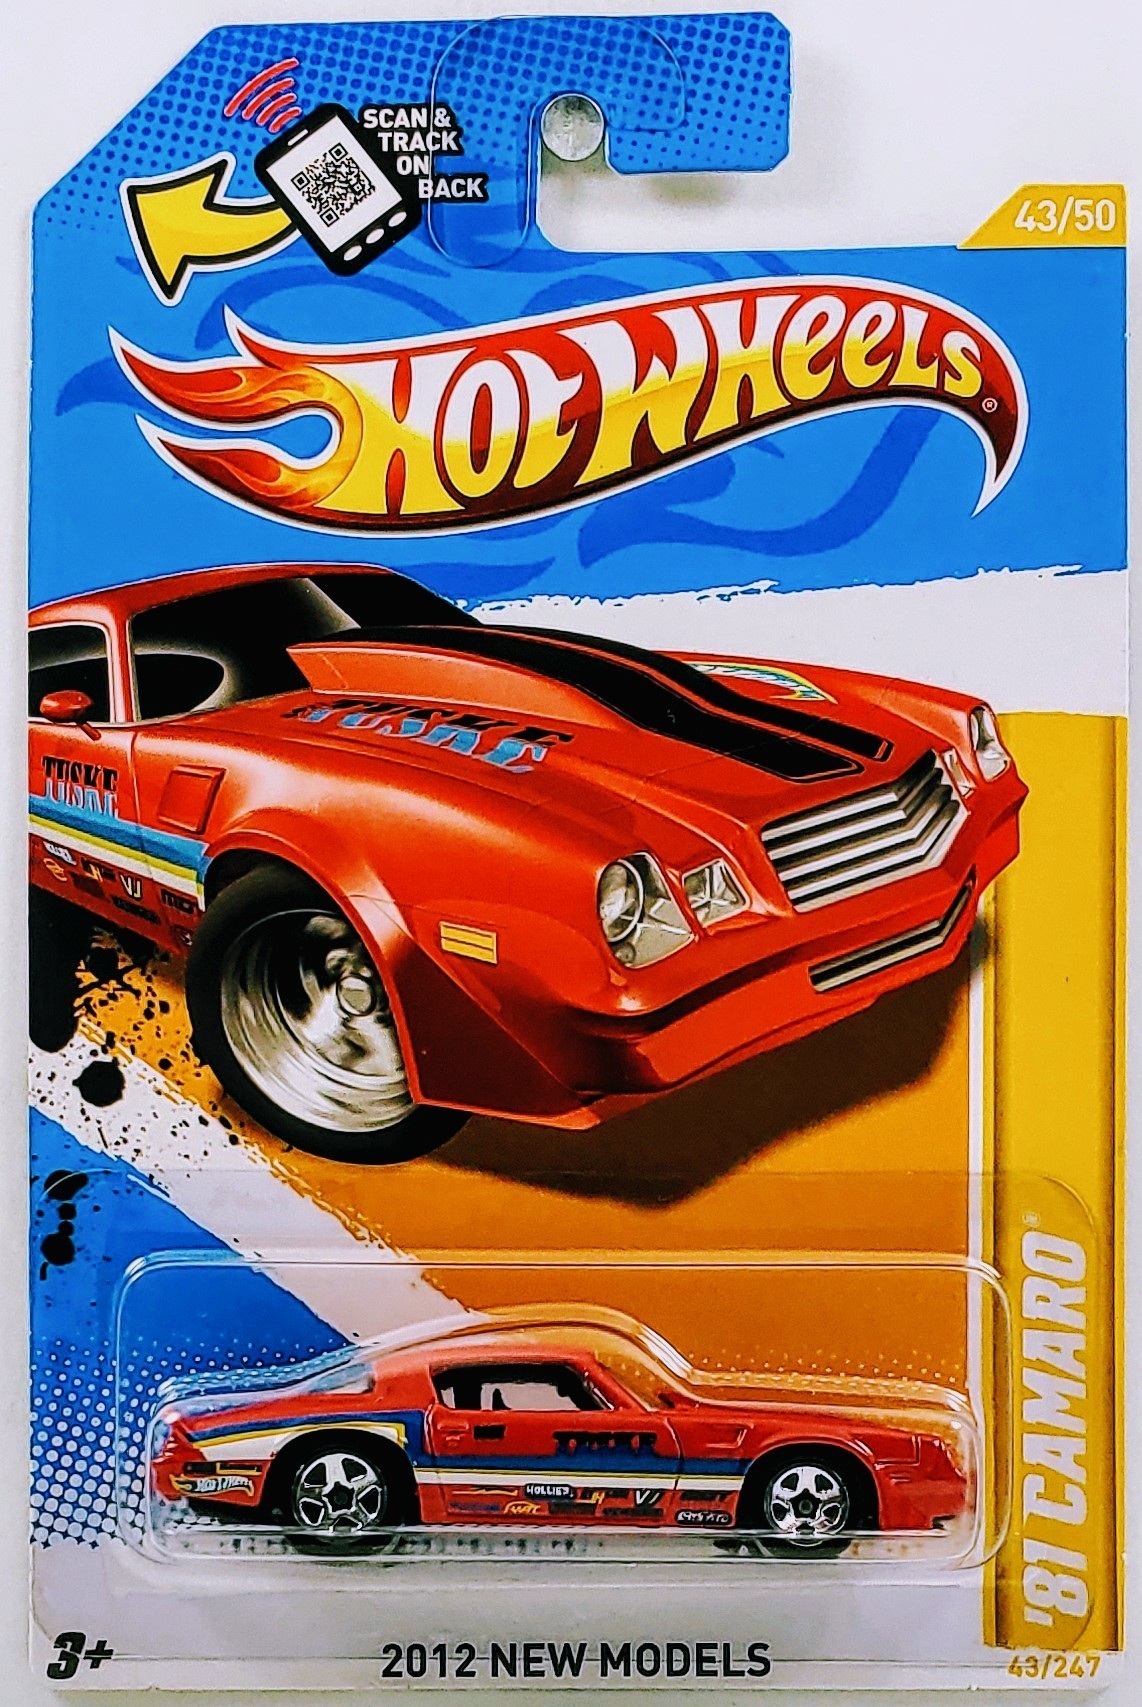 Hot Wheels 2012 - Collector # 043/247 - New Models 43/50 - '81 Camaro - Red - USA Scan & Track Card